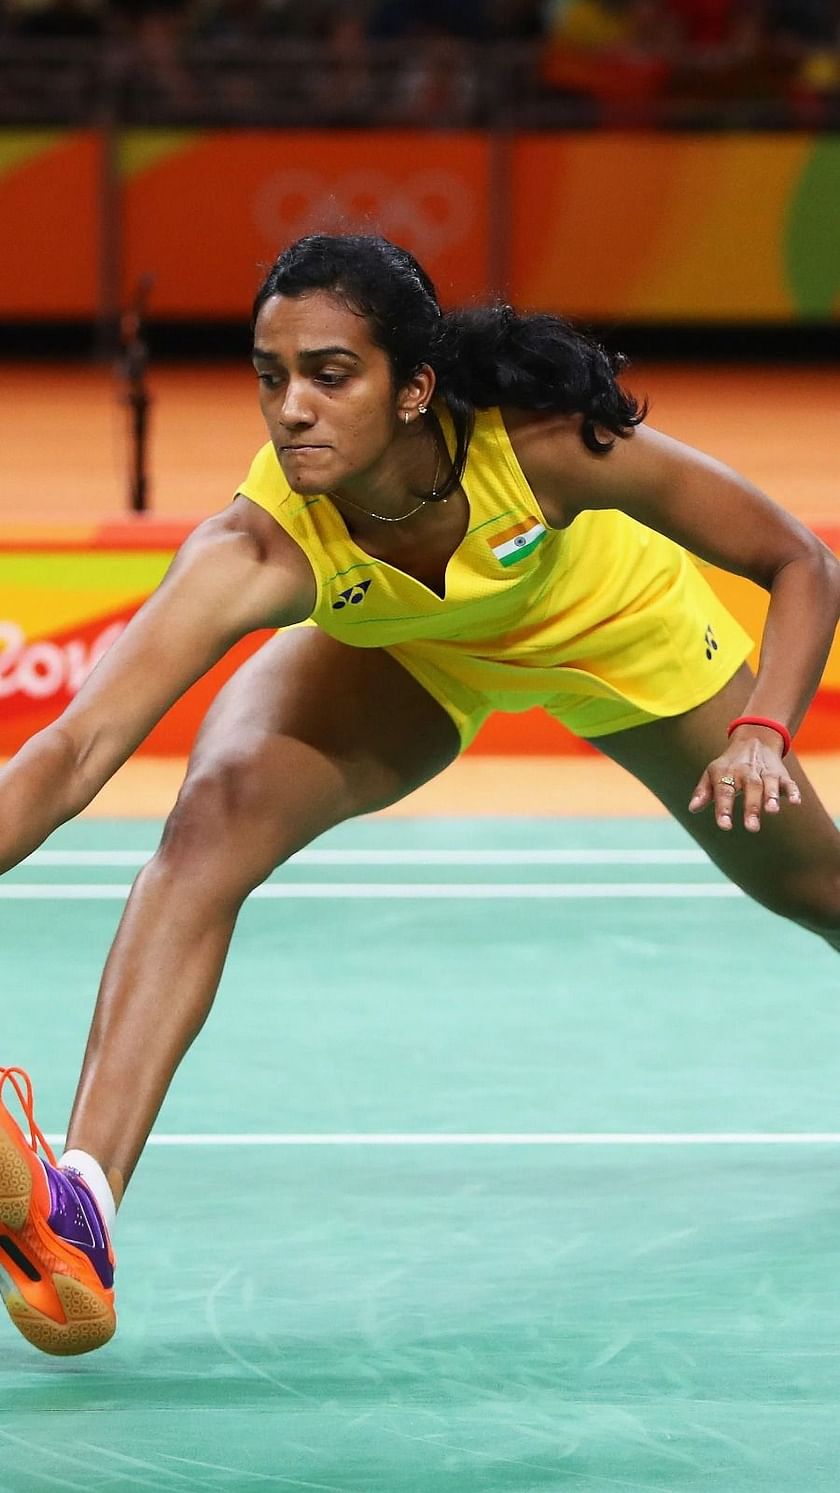 Is PV Sindhu's height an advantage at Tokyo Olympics 2020?